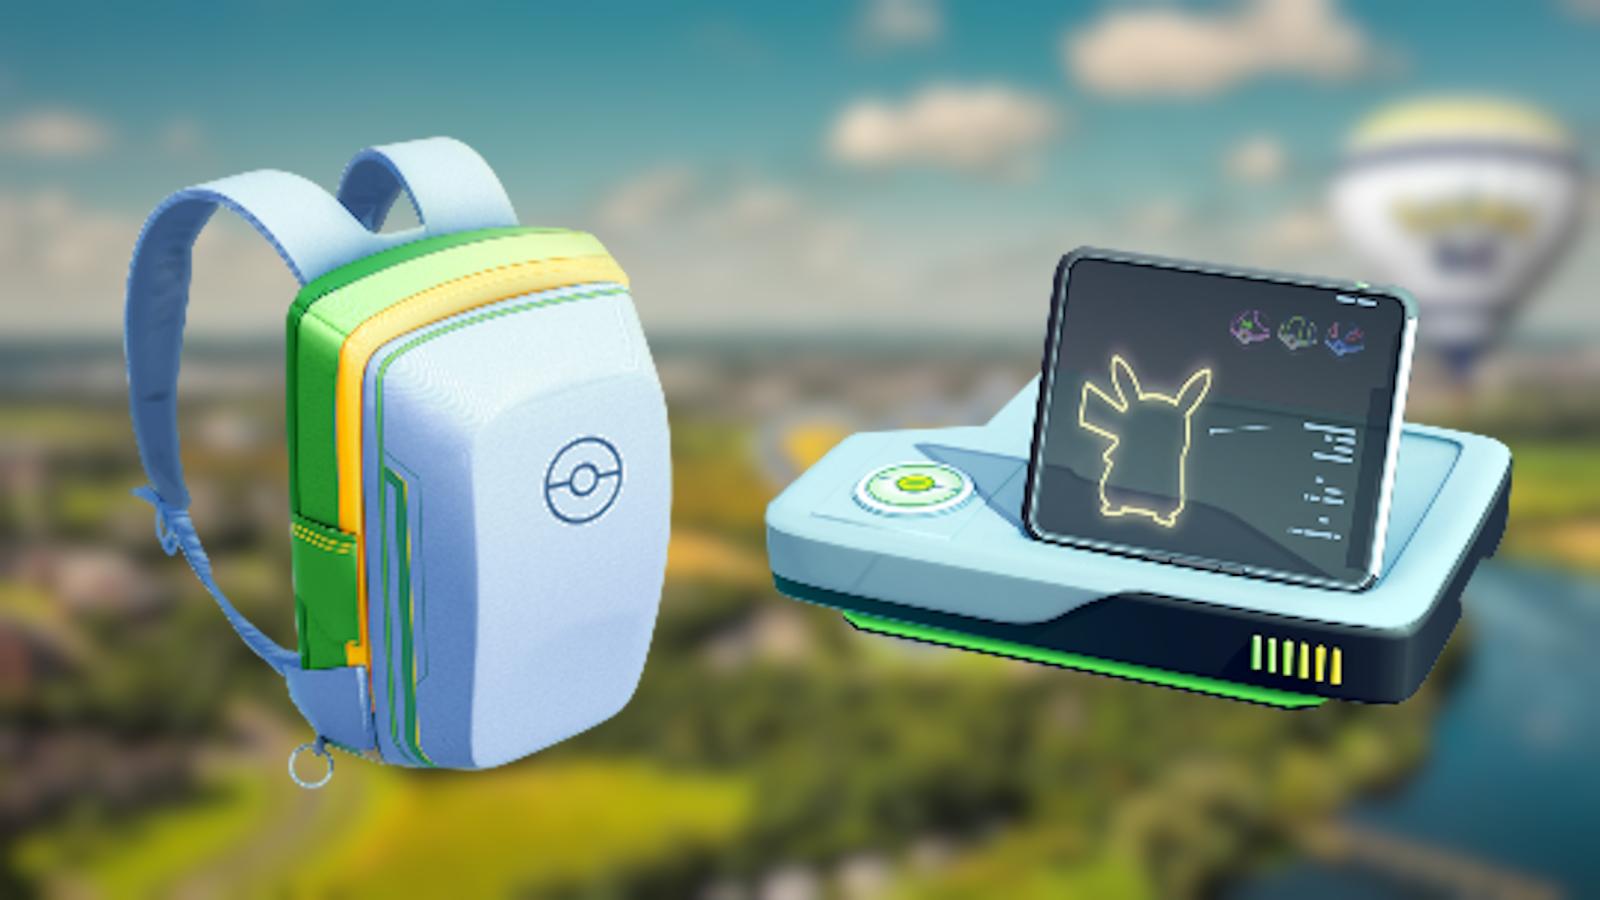 Pokemon GO bag and storage icons in front of blurred image of London for GO Fest event.